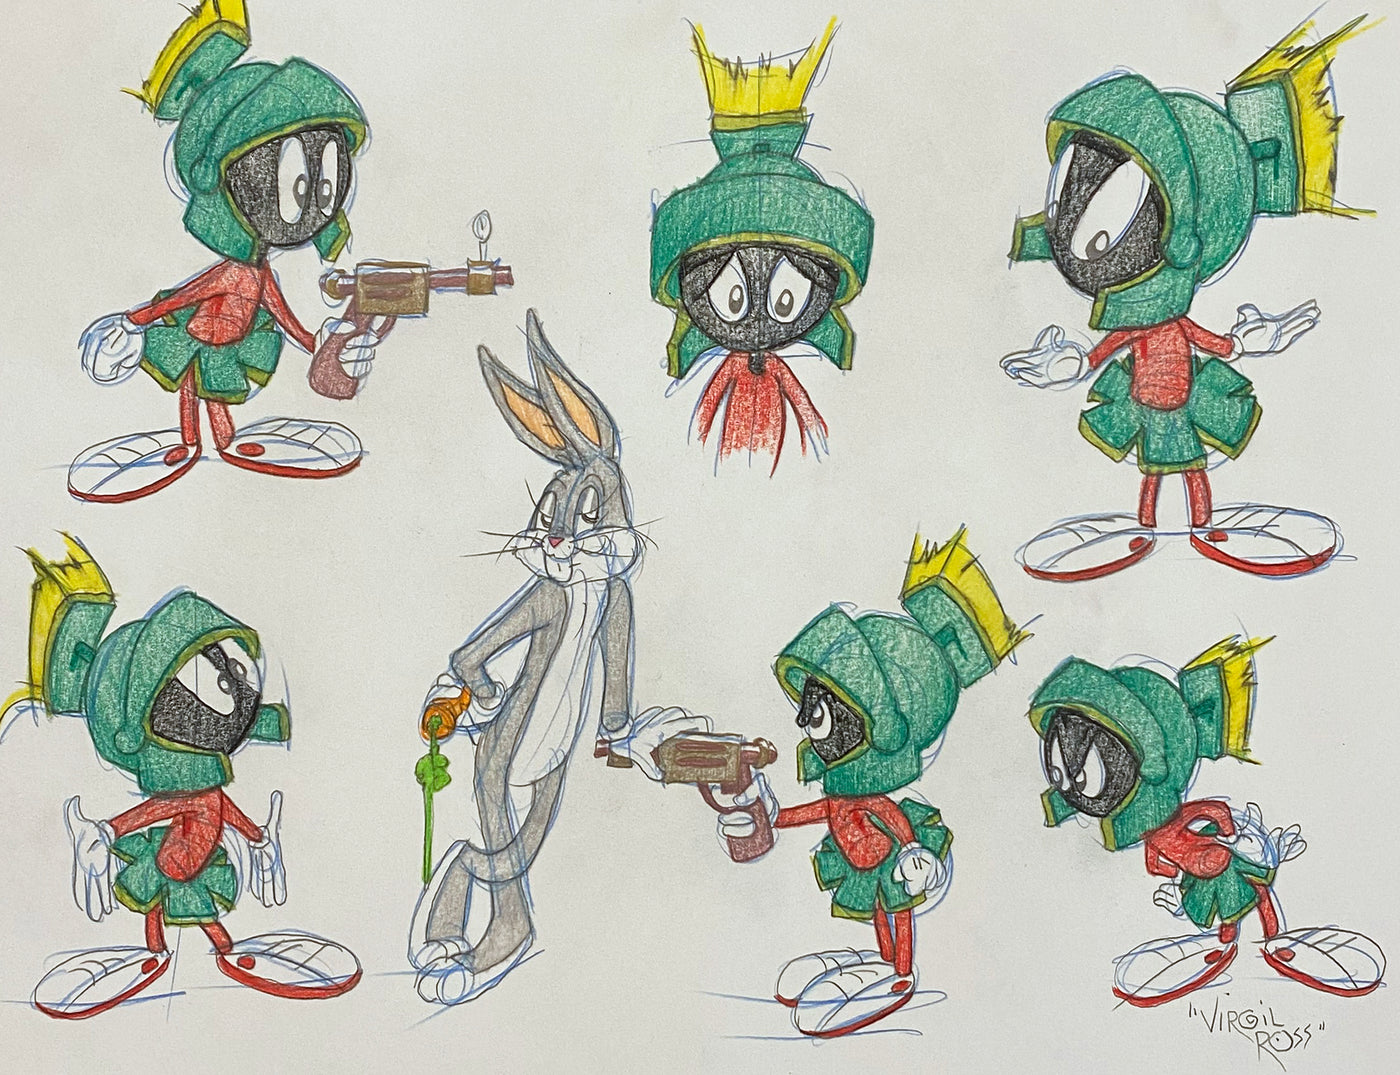 Original Warner Brothers Virgil Ross Model Sheet Animation Drawing featuring Marvin the Martian and Bugs Bunny